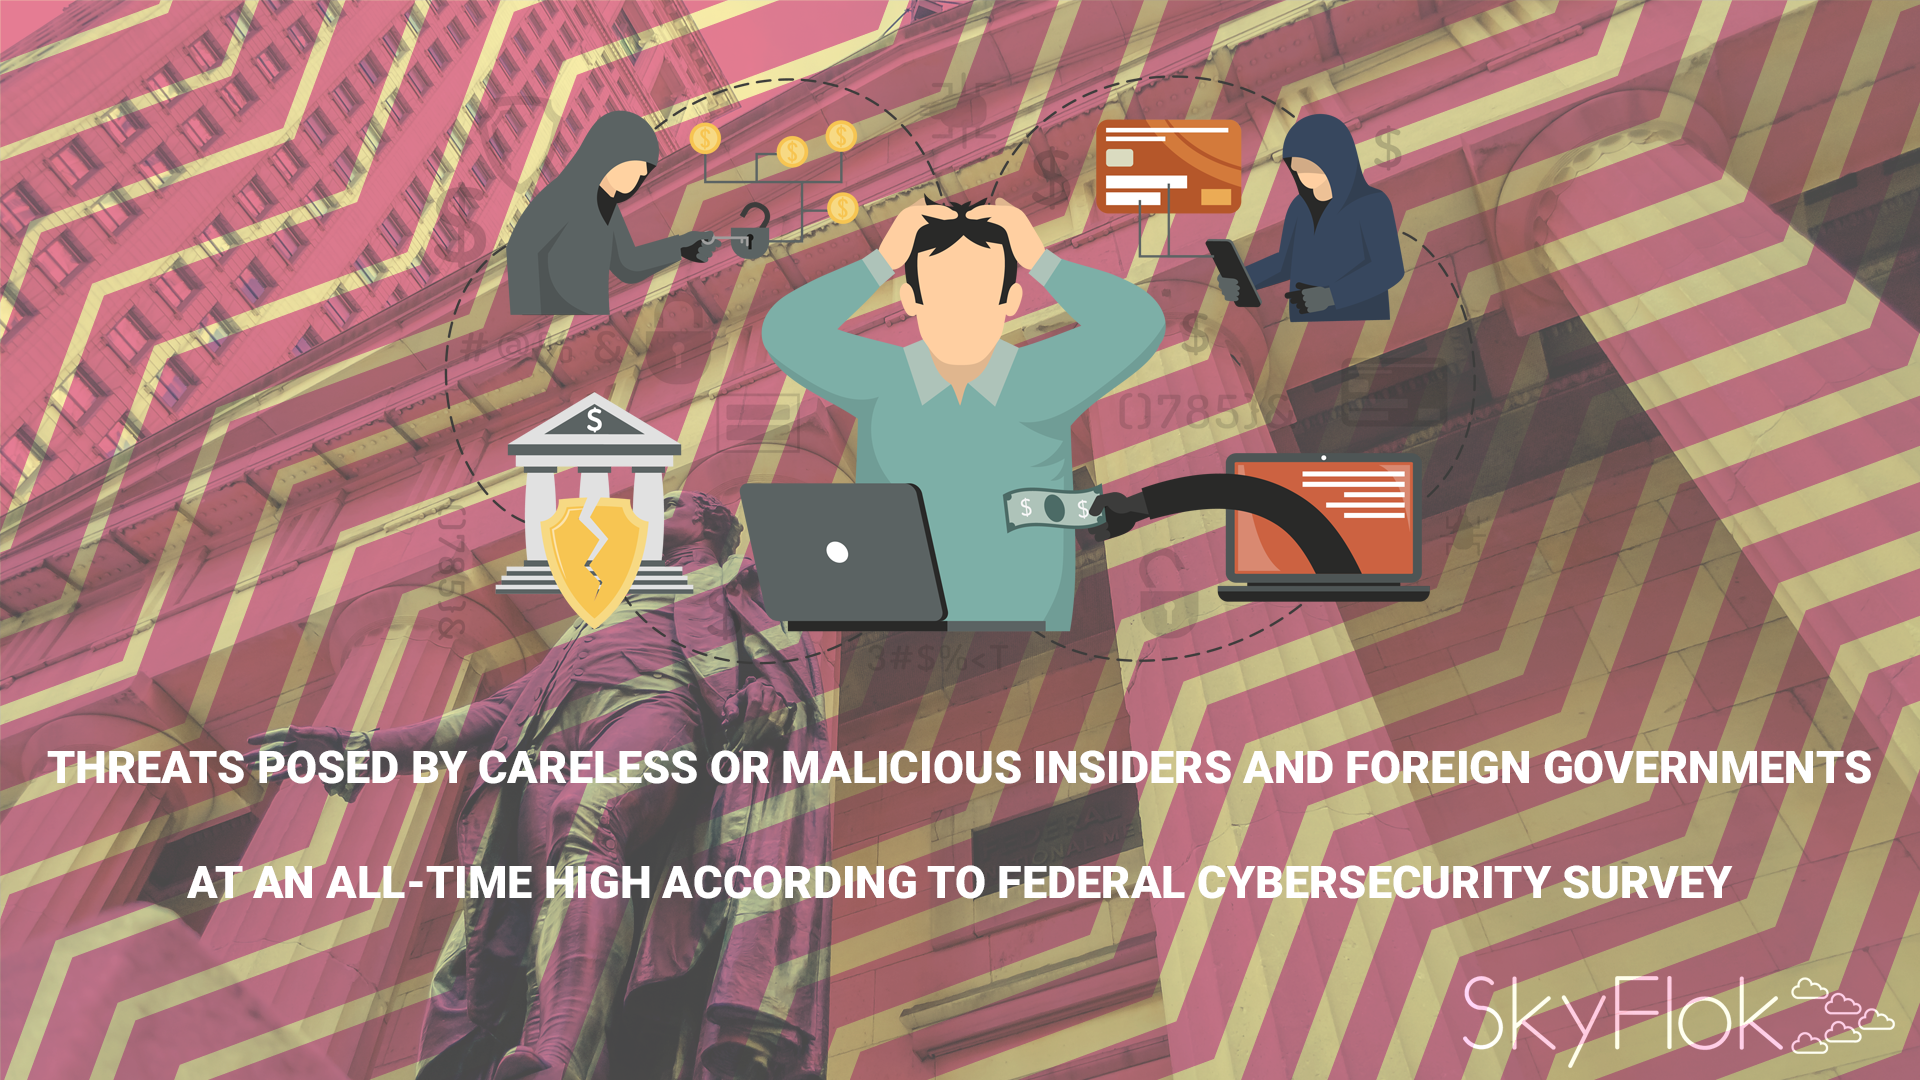 You are currently viewing Threats Posed by Careless or Malicious Insiders and Foreign Governments at an All-Time High according to Federal Cybersecurity Survey